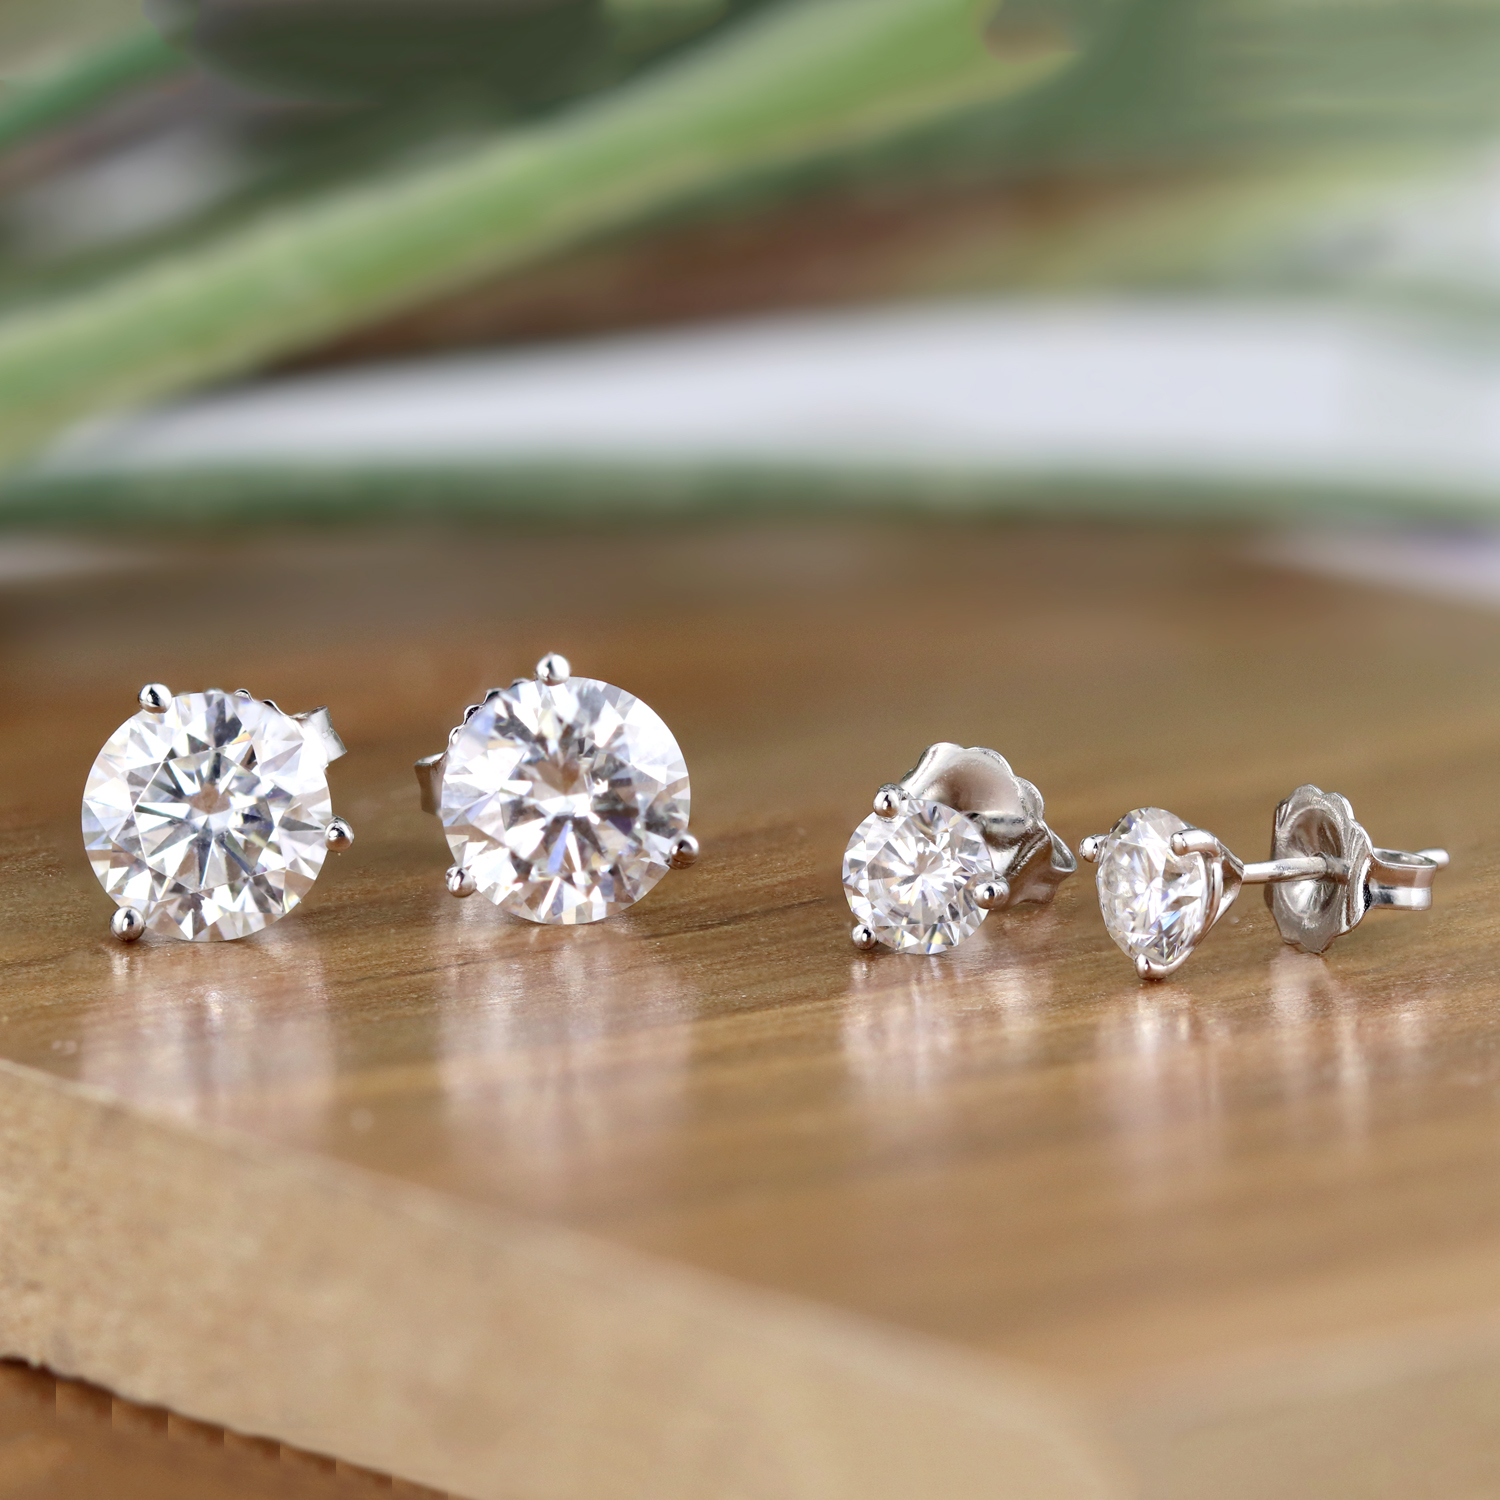 What is an Ideal Size for Diamond Stud Earrings? - DiamondStuds News